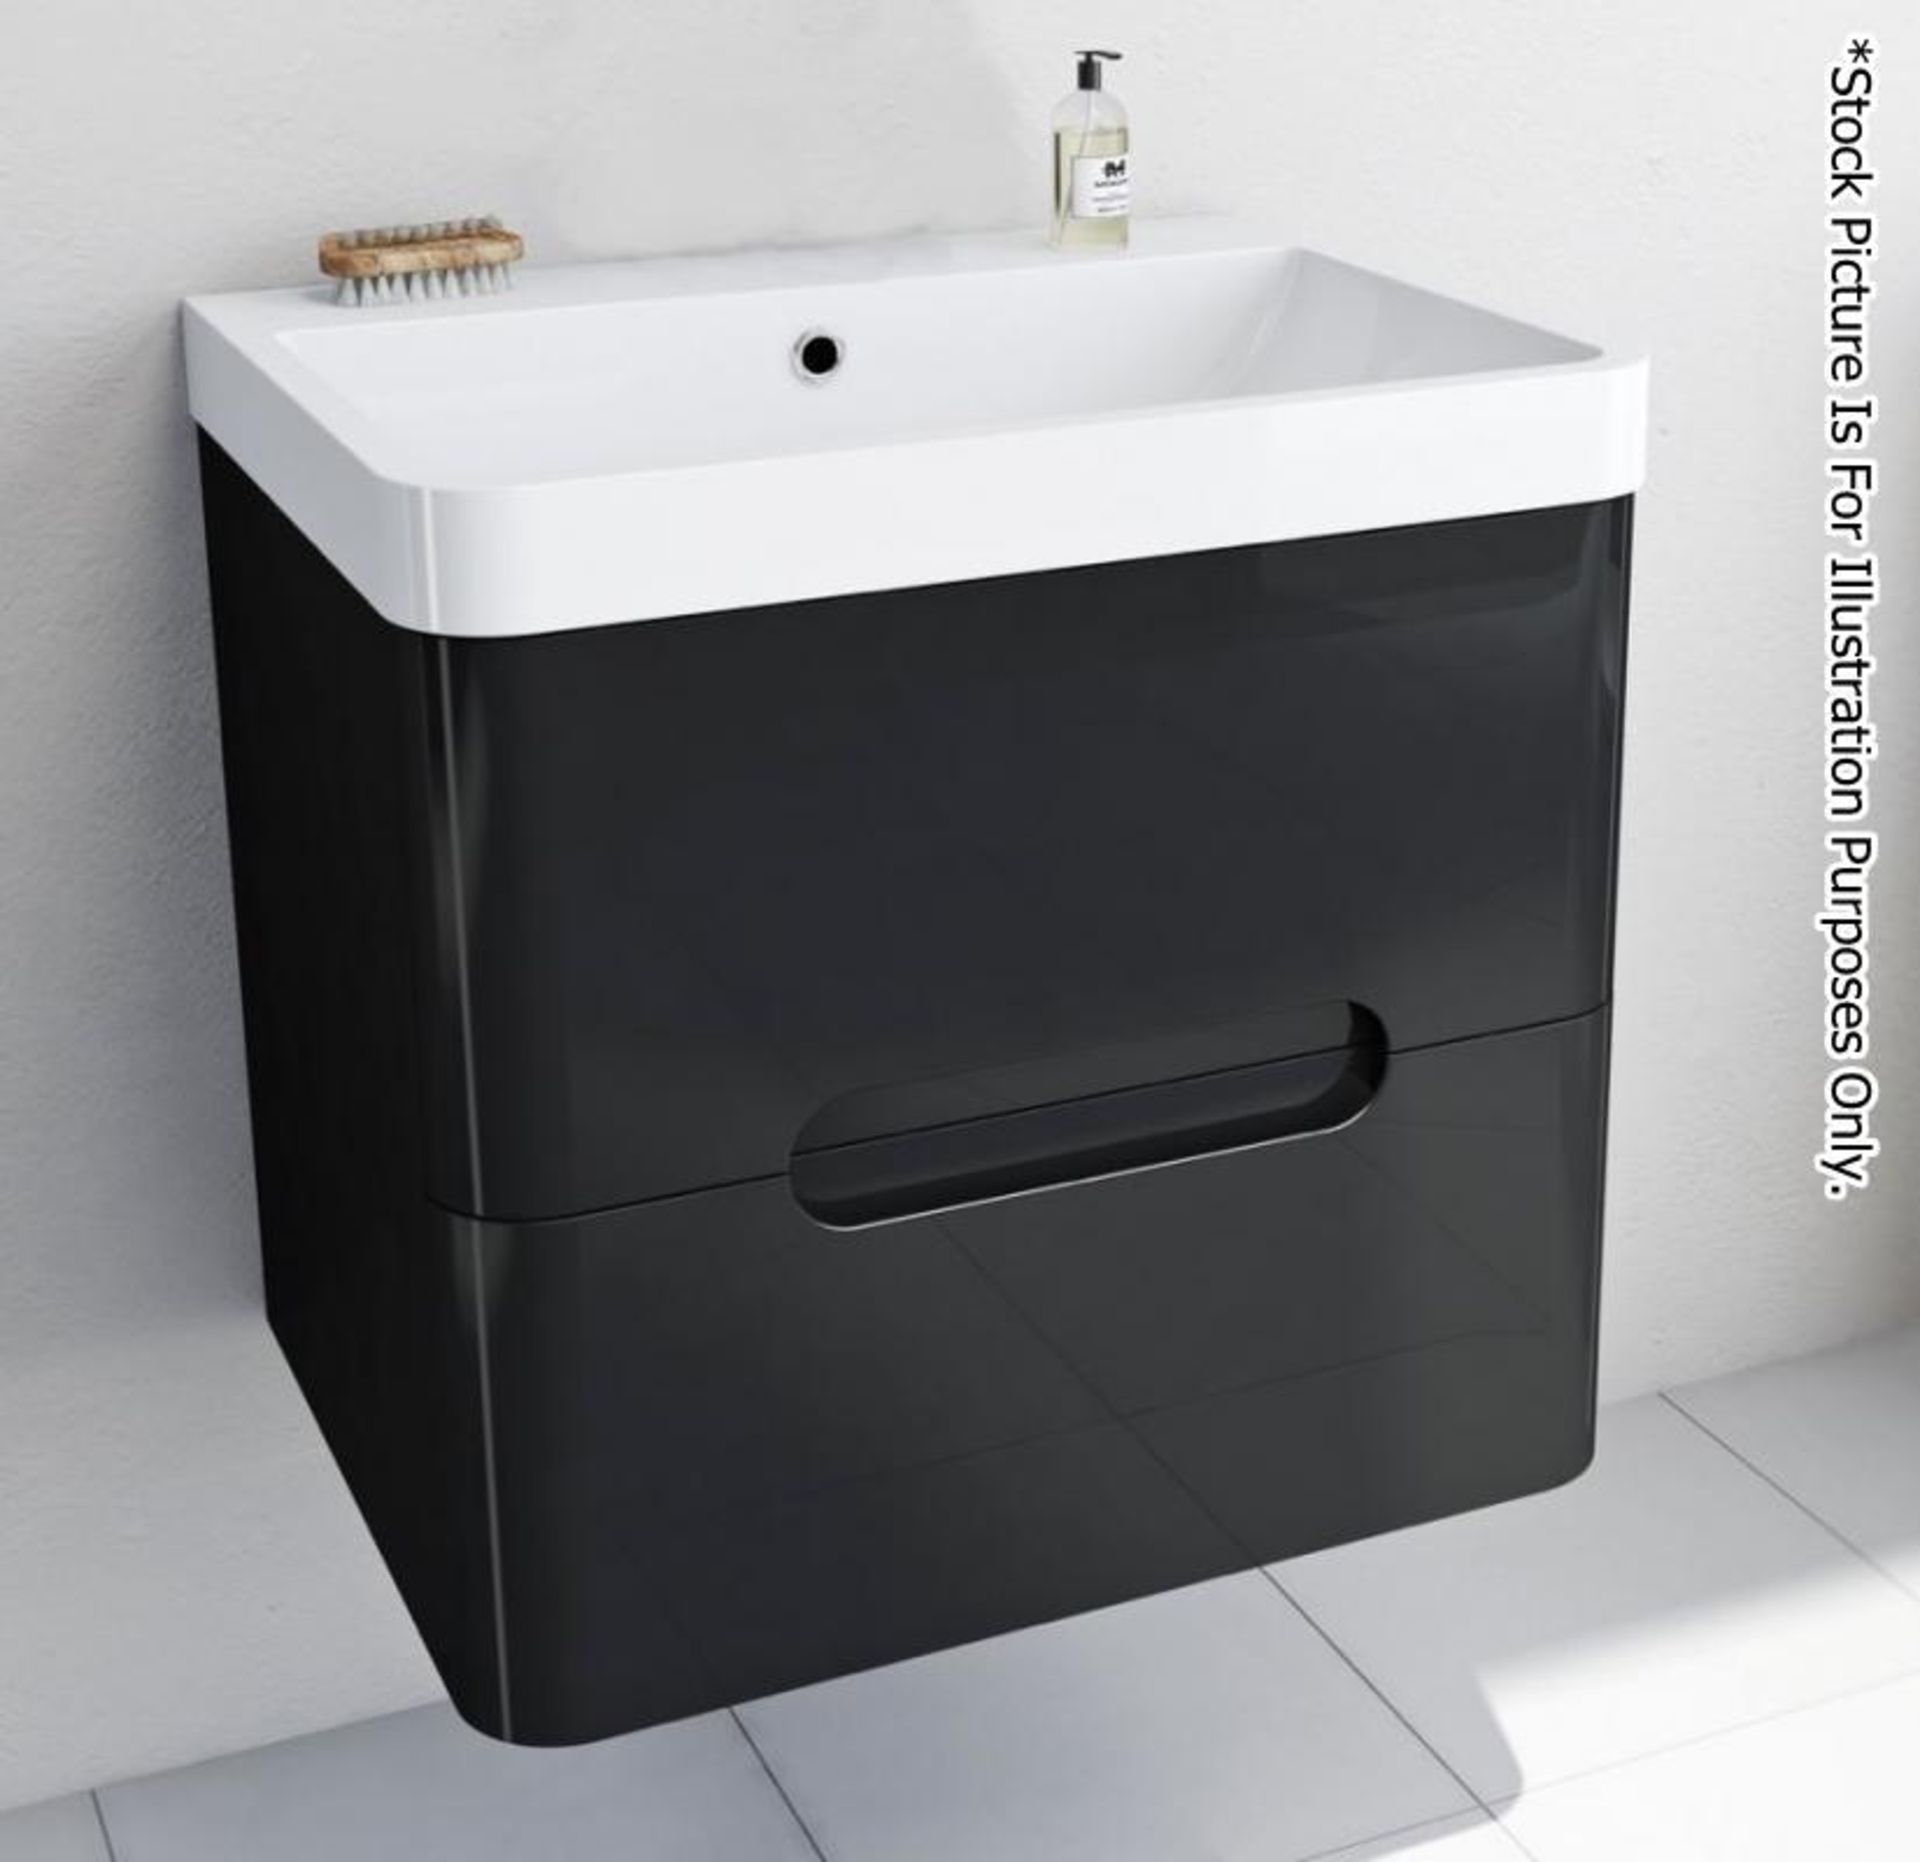 1 x Mode Planet Black Gloss Wall Hung Vanity Unit - Features Curved Edges And Soft Close Drawers - C